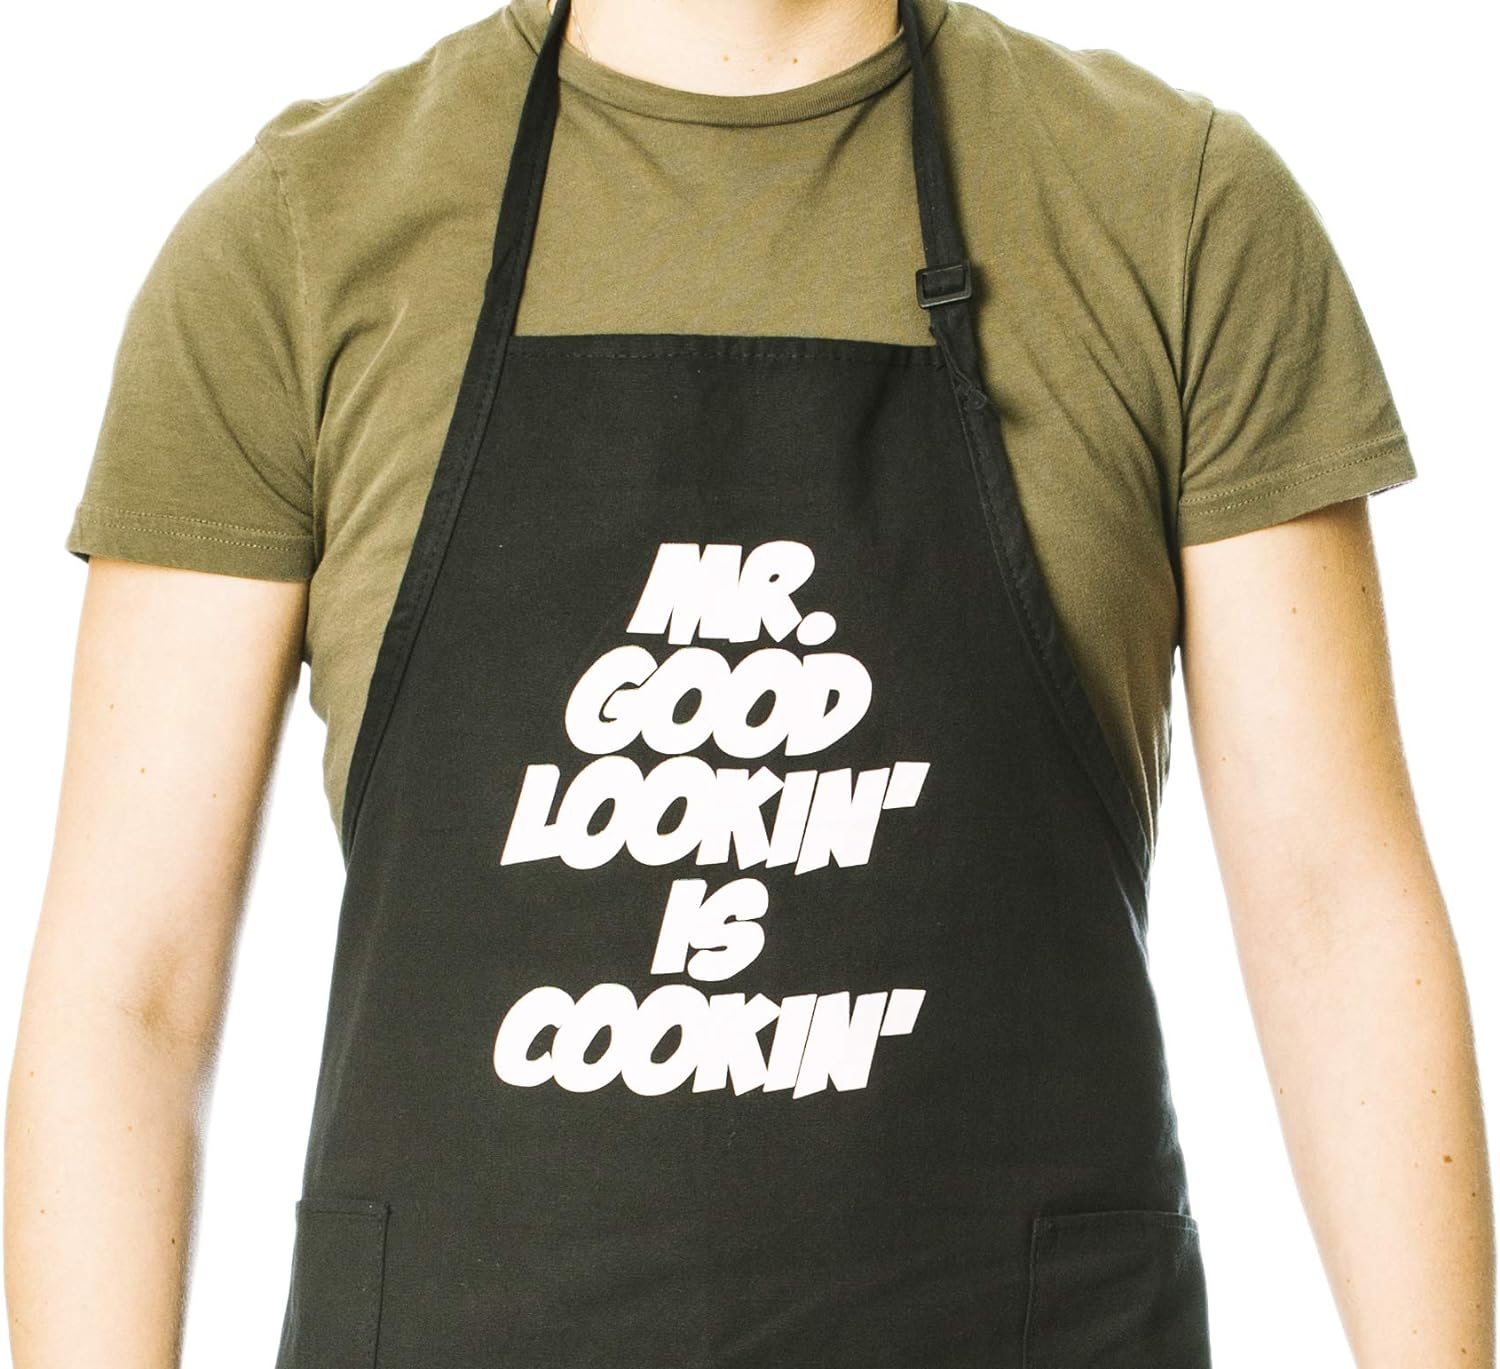 Mr. Good Lookin' Is Cookin' Adjustable Apron with Pockets - Funny Apron - Perfect for BBQ Grilling Barbecue